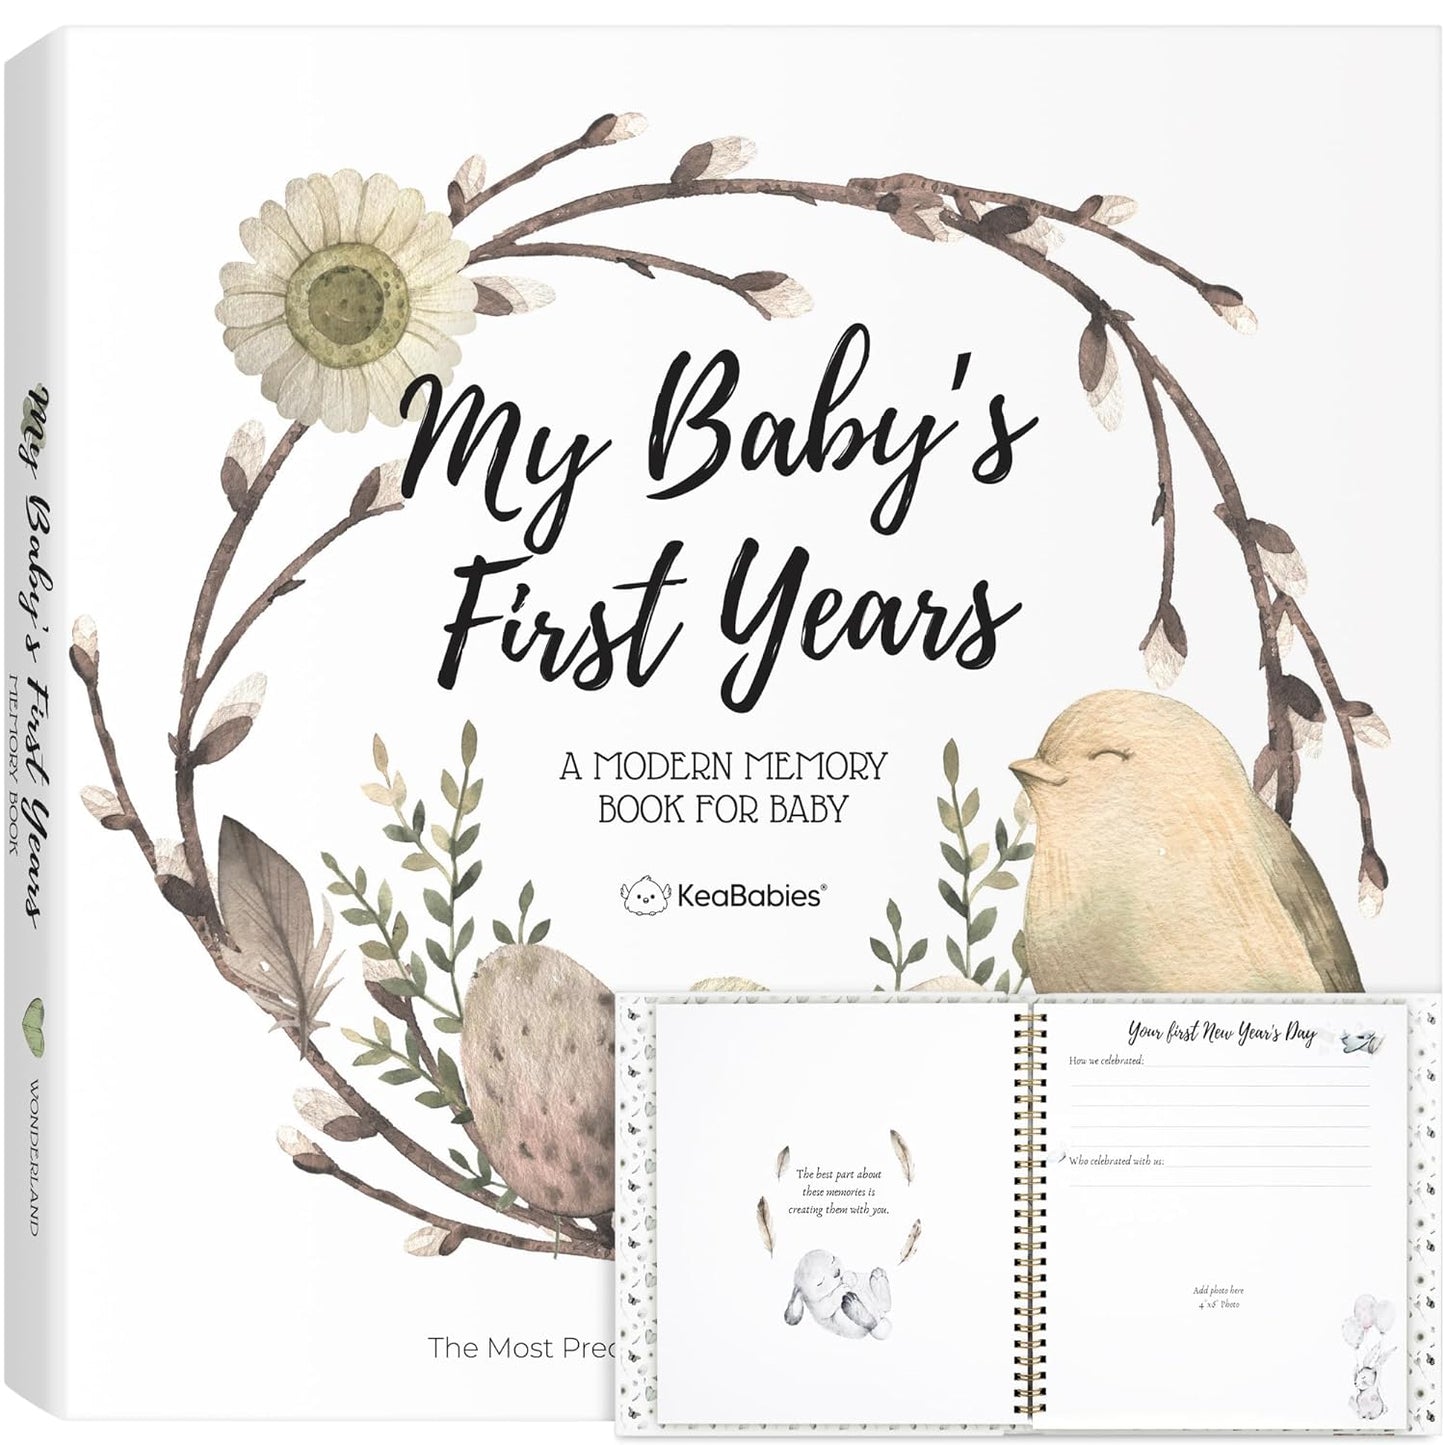 First 5 Years Baby Memory Book Journal - 90 Pages Hardcover First Year Keepsake Milestone Baby Book For Boys, Girls - Baby Scrapbook - Baby Album And Memory Book (SeaWorld)